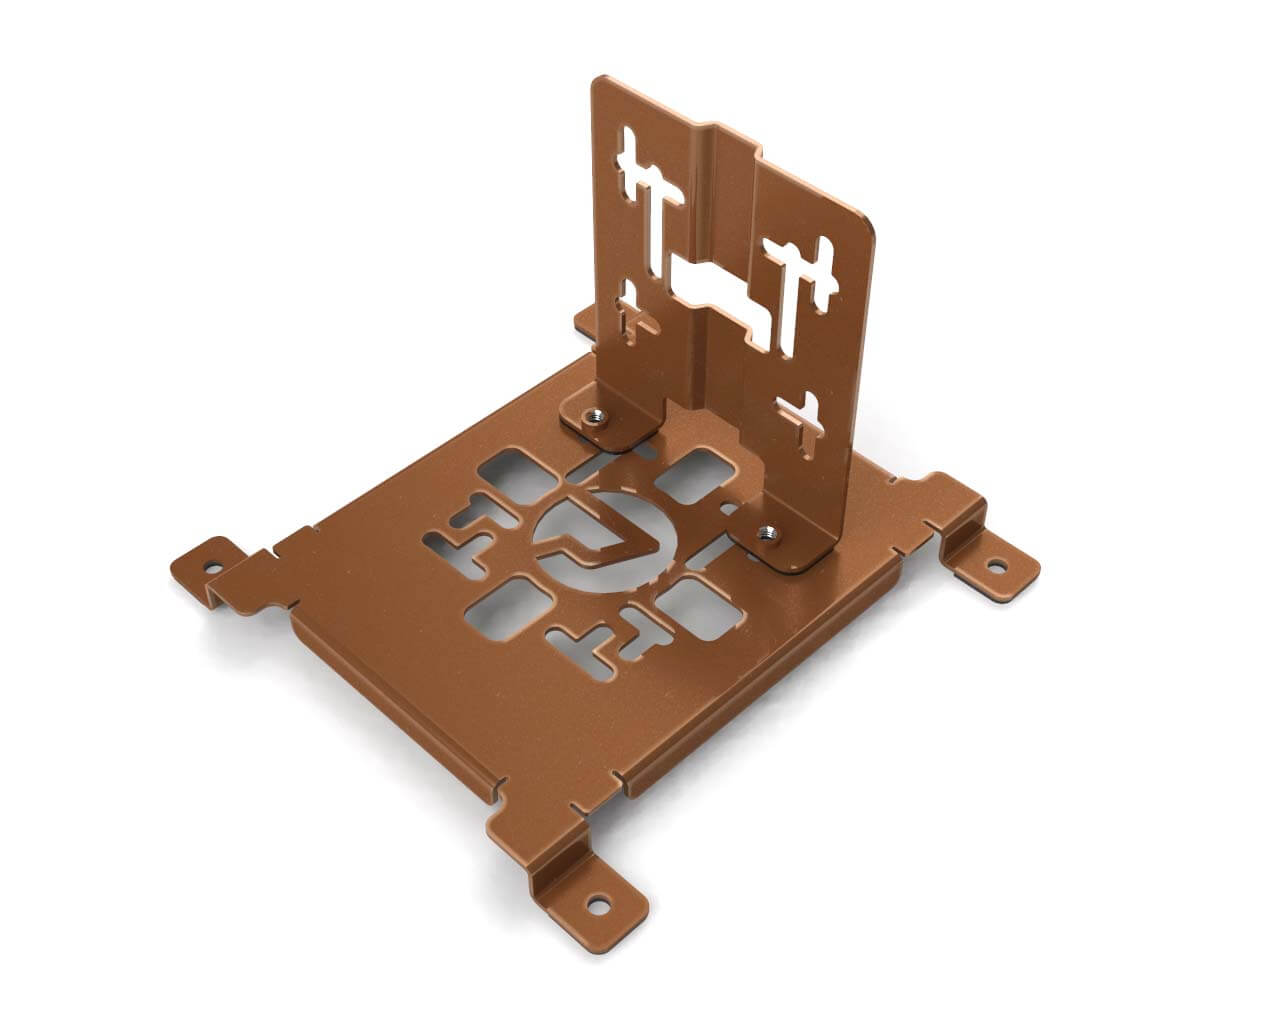 PrimoChill SX Universal Spider Mount Bracket Kit - 140mm Series - PrimoChill - KEEPING IT COOL Copper